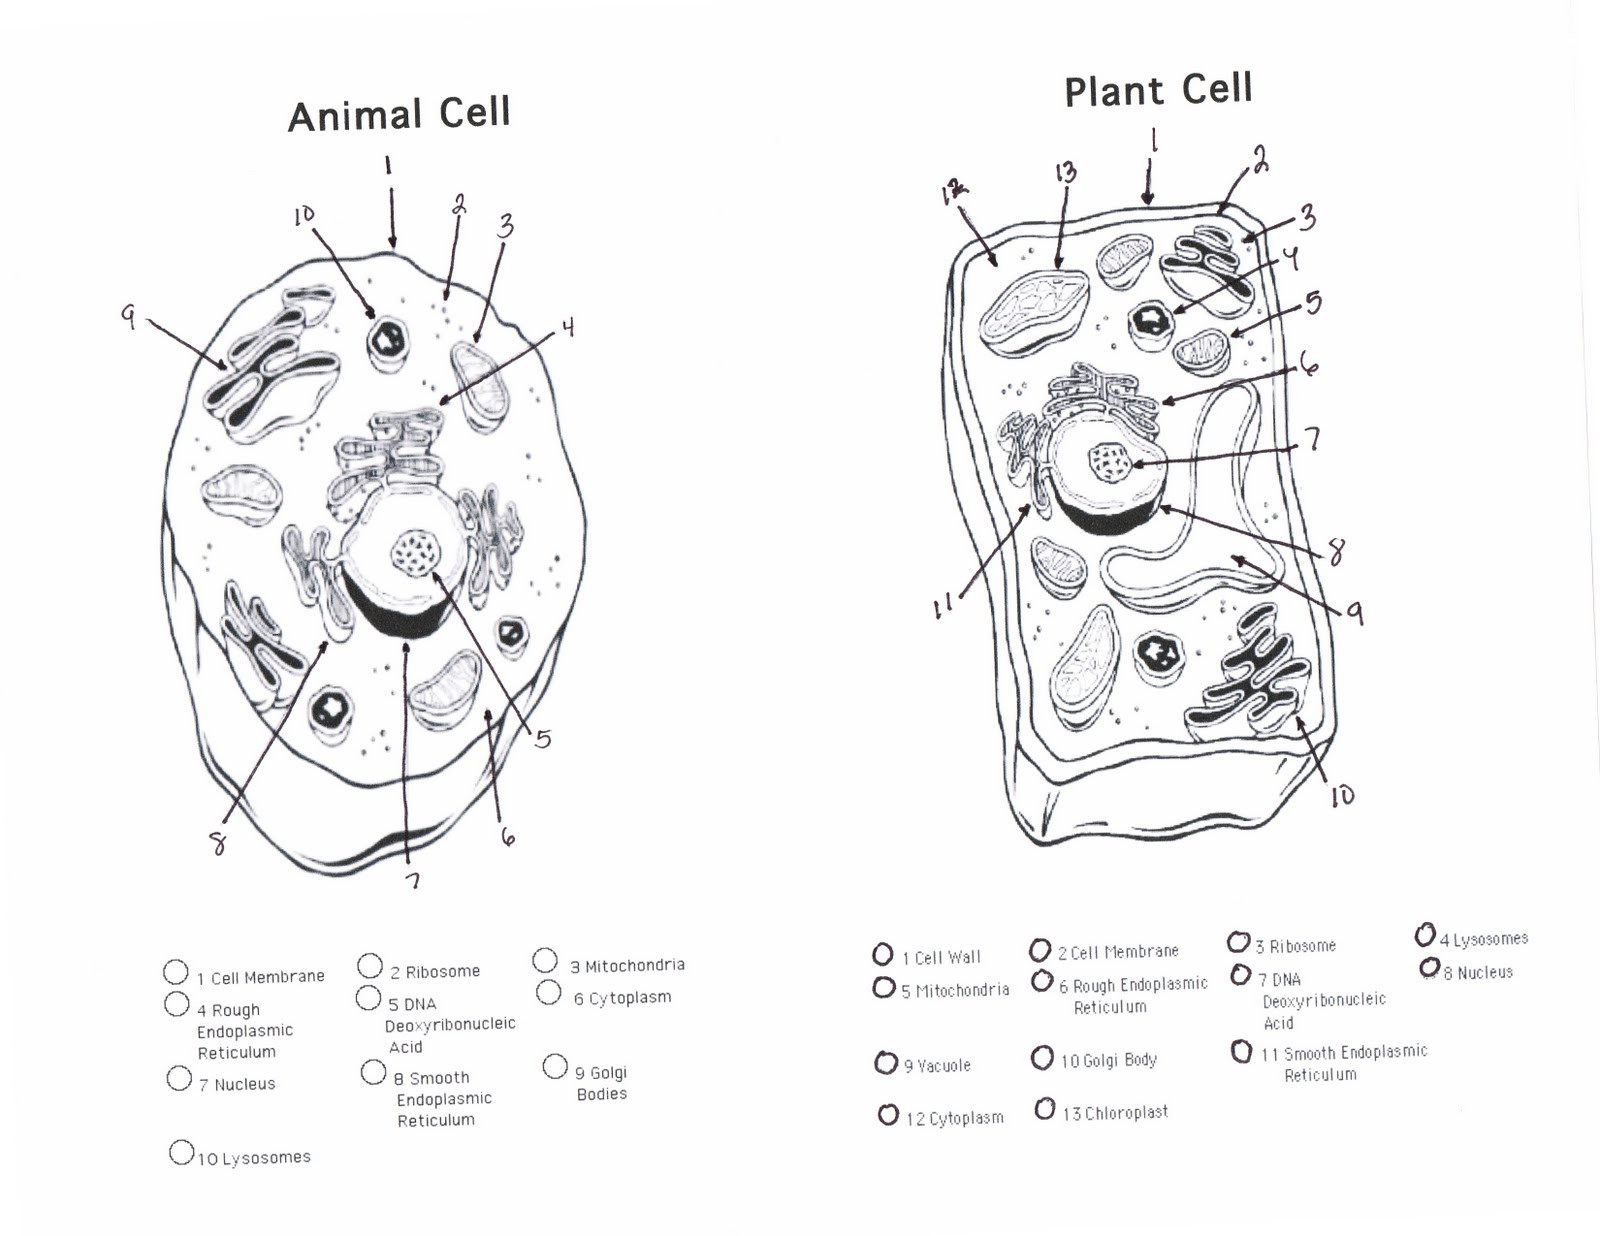 Animal Cellloring Worksheet Free Pdf Plant Printable Preschool Cell Coloring Pages